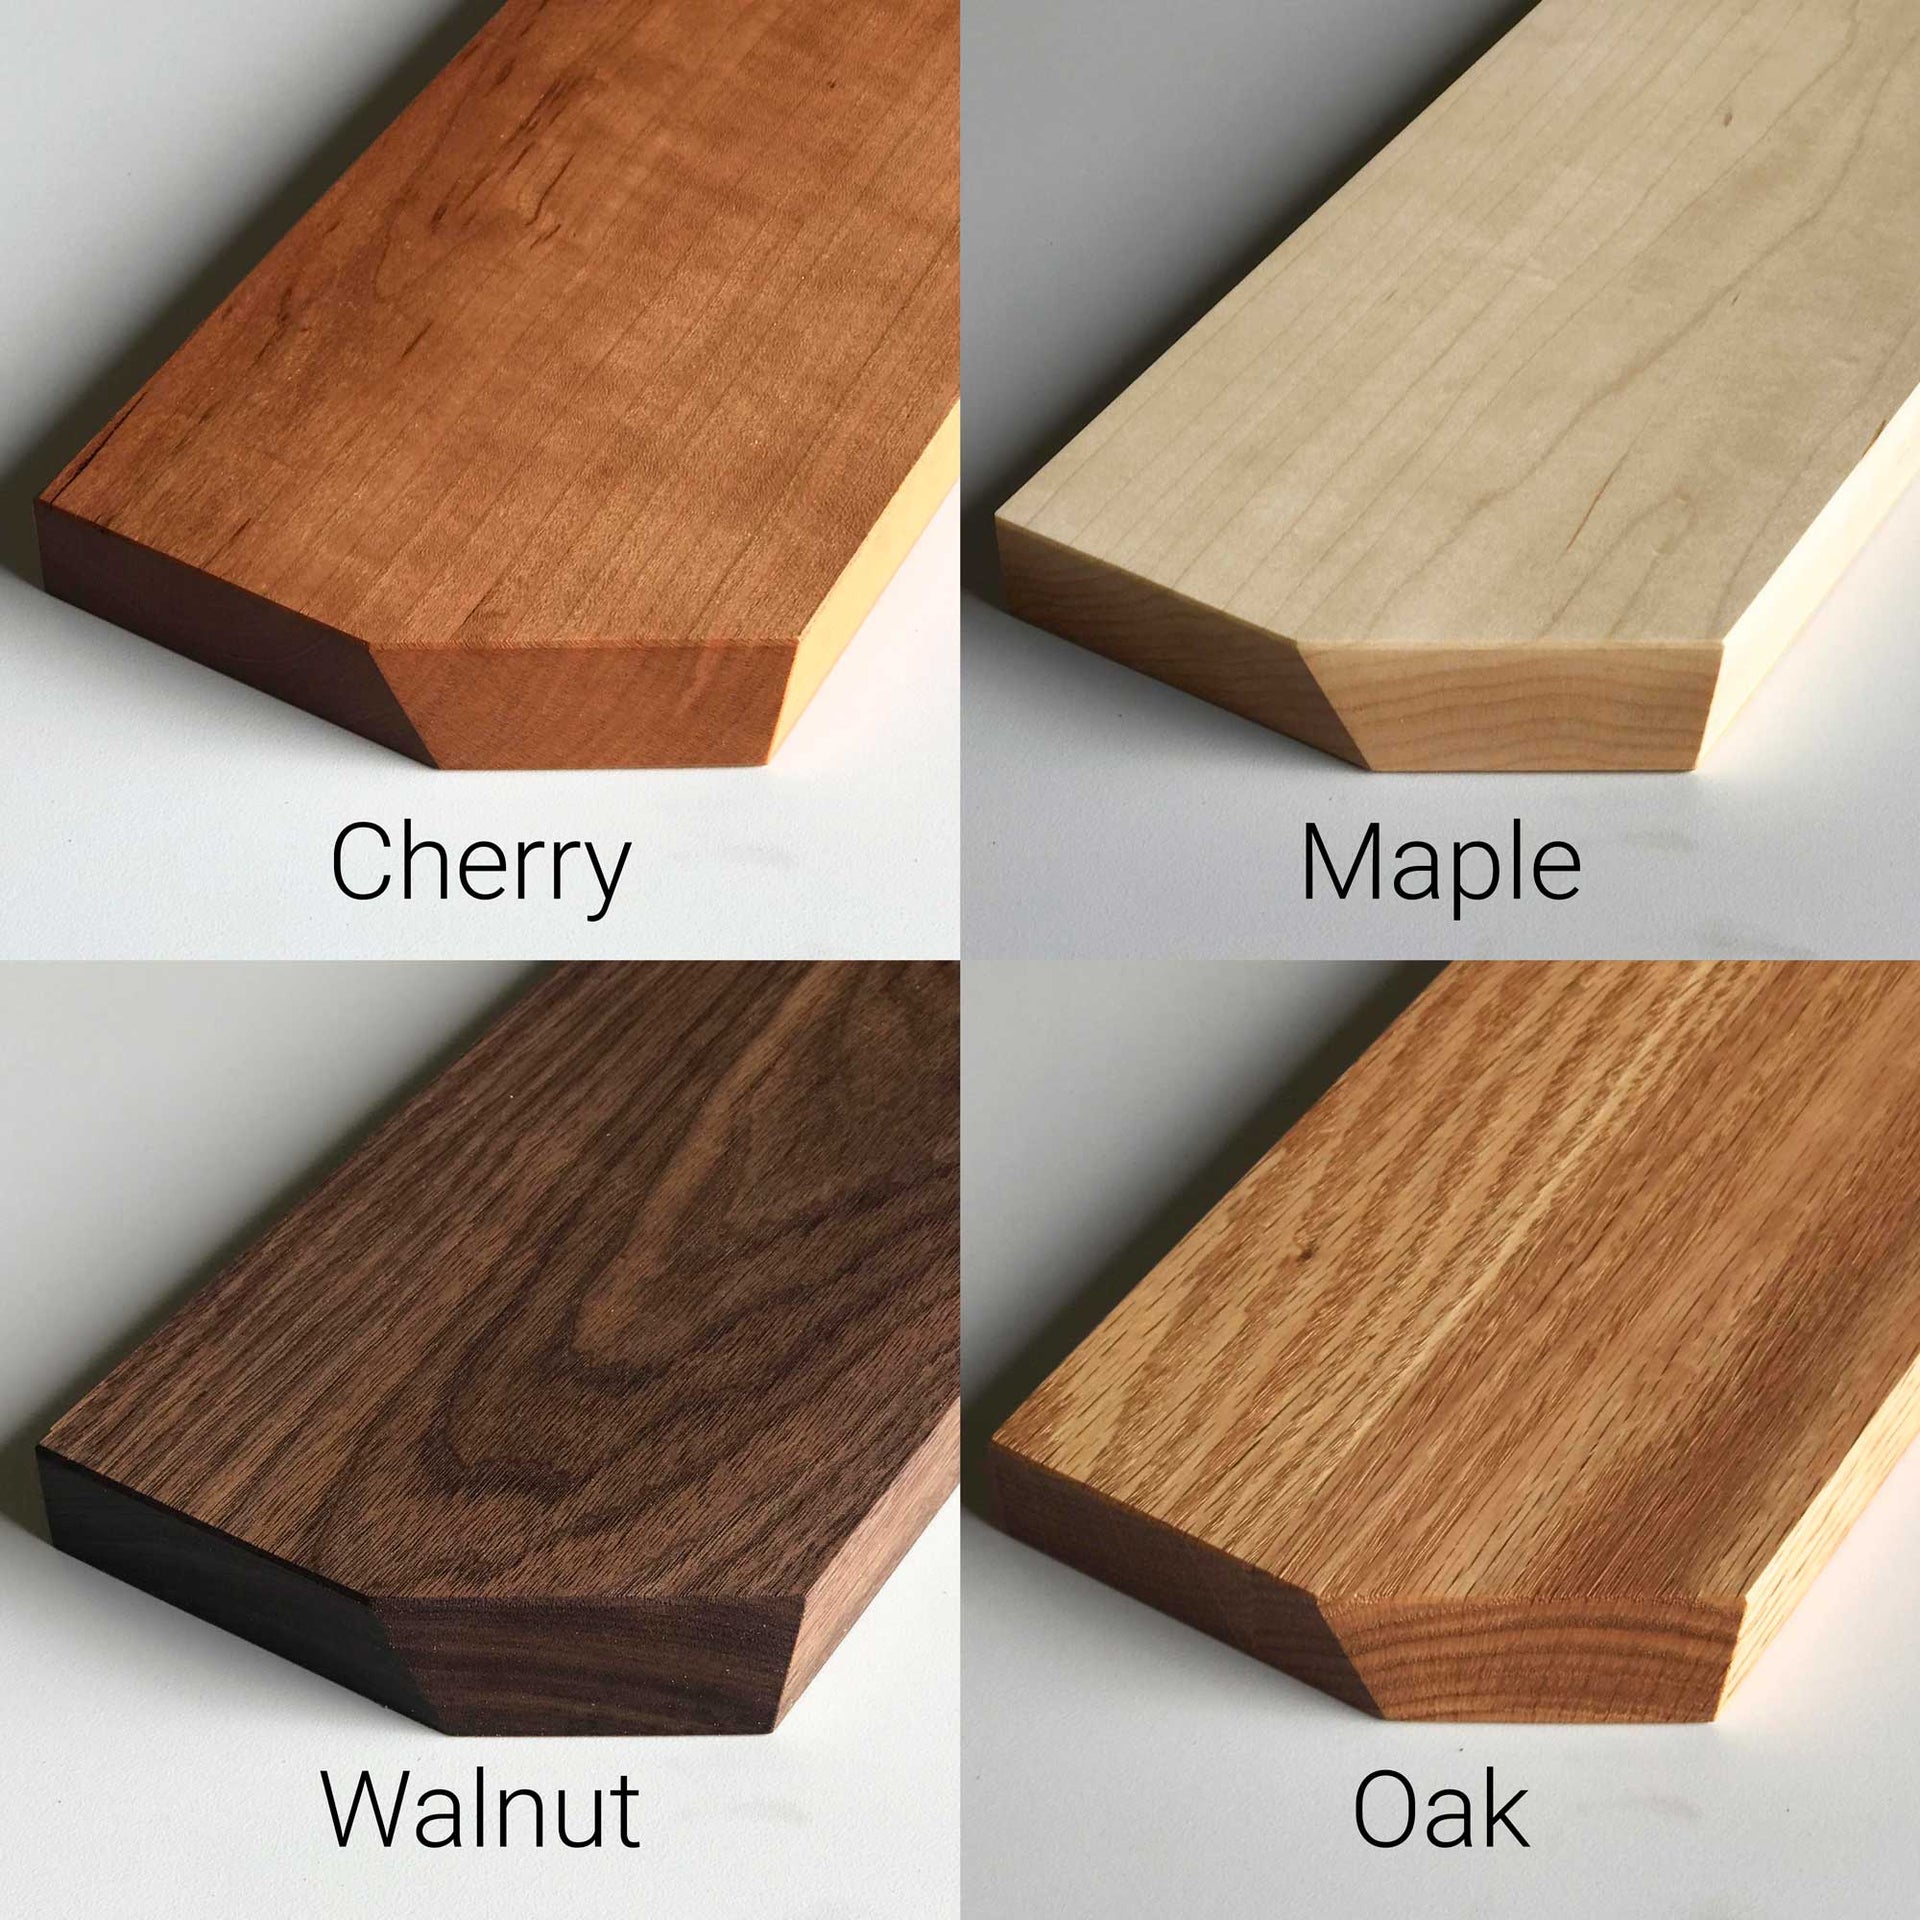 Solid wood samples for cherry, walnut, maple, and oak